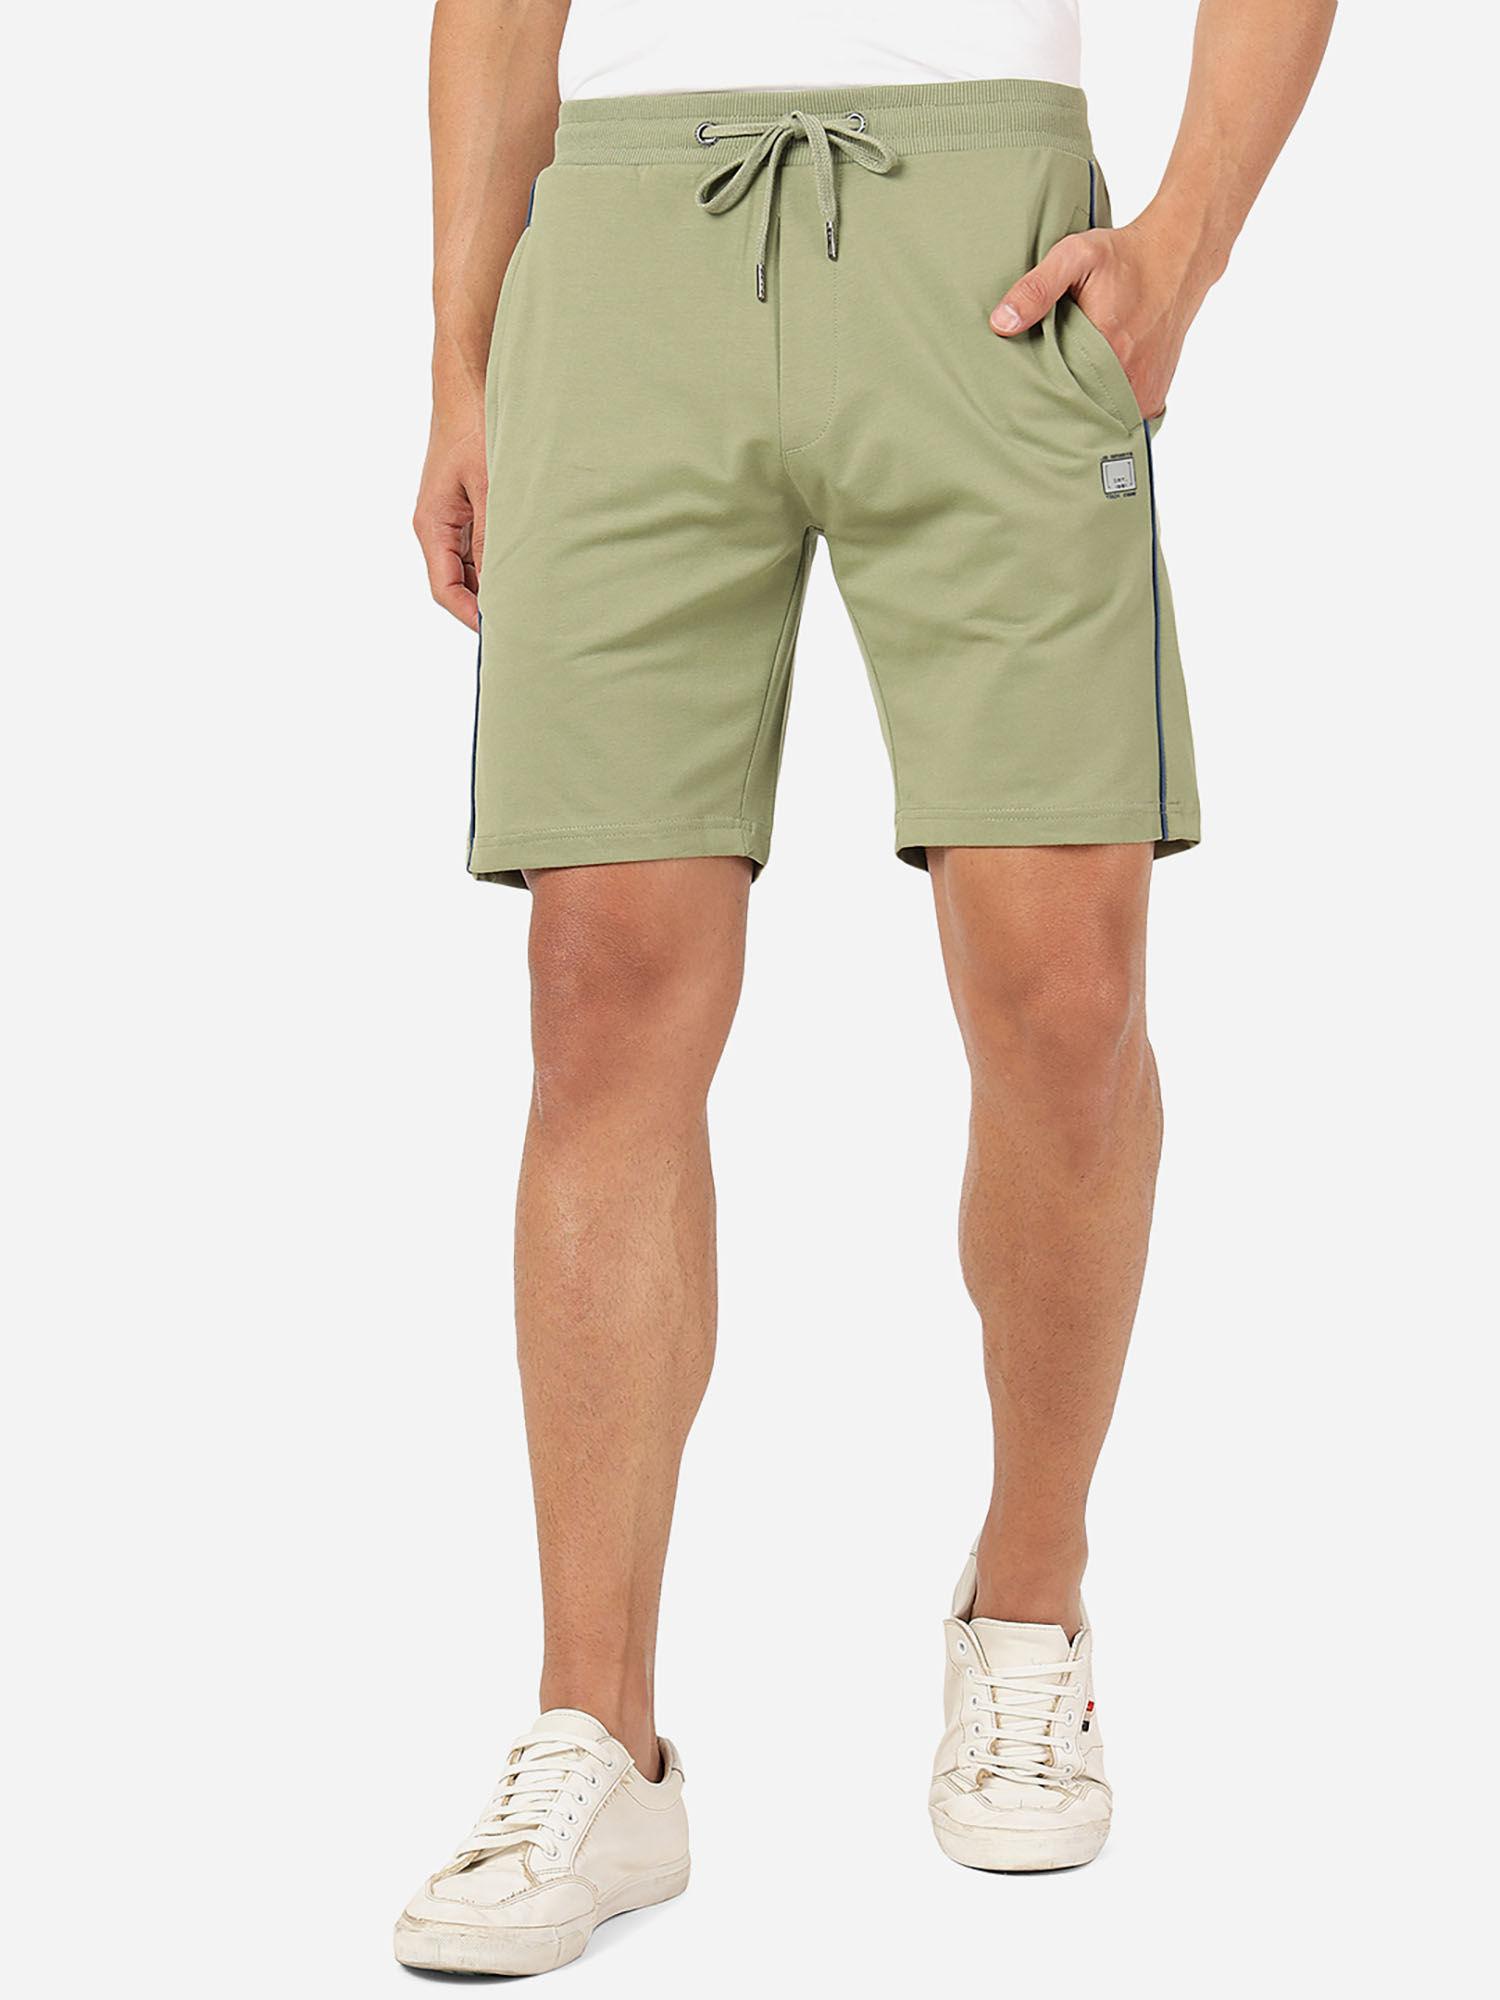 mens 100% cotton solid slim fit shorts olive green